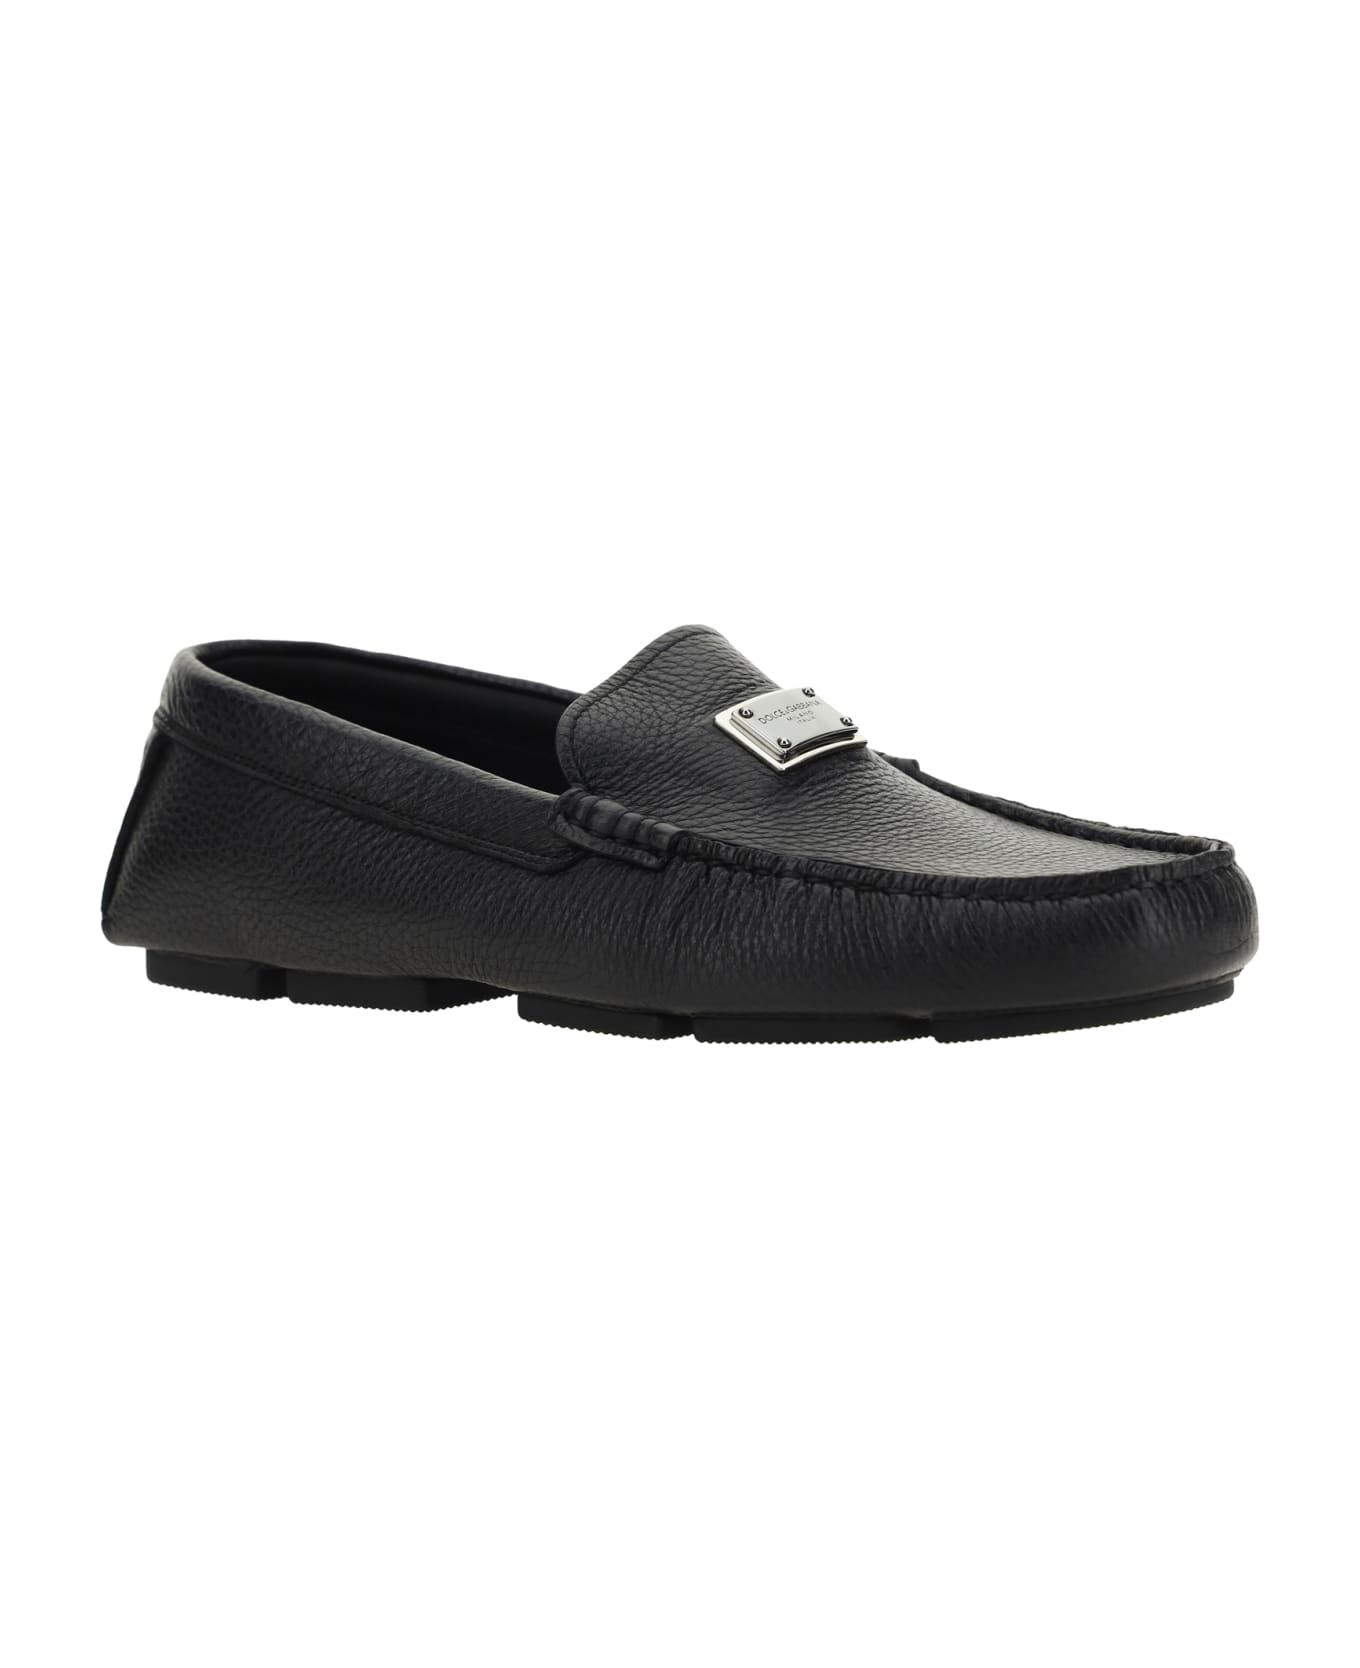 Dolce & Gabbana Leather Loafers - black ローファー＆デッキシューズ